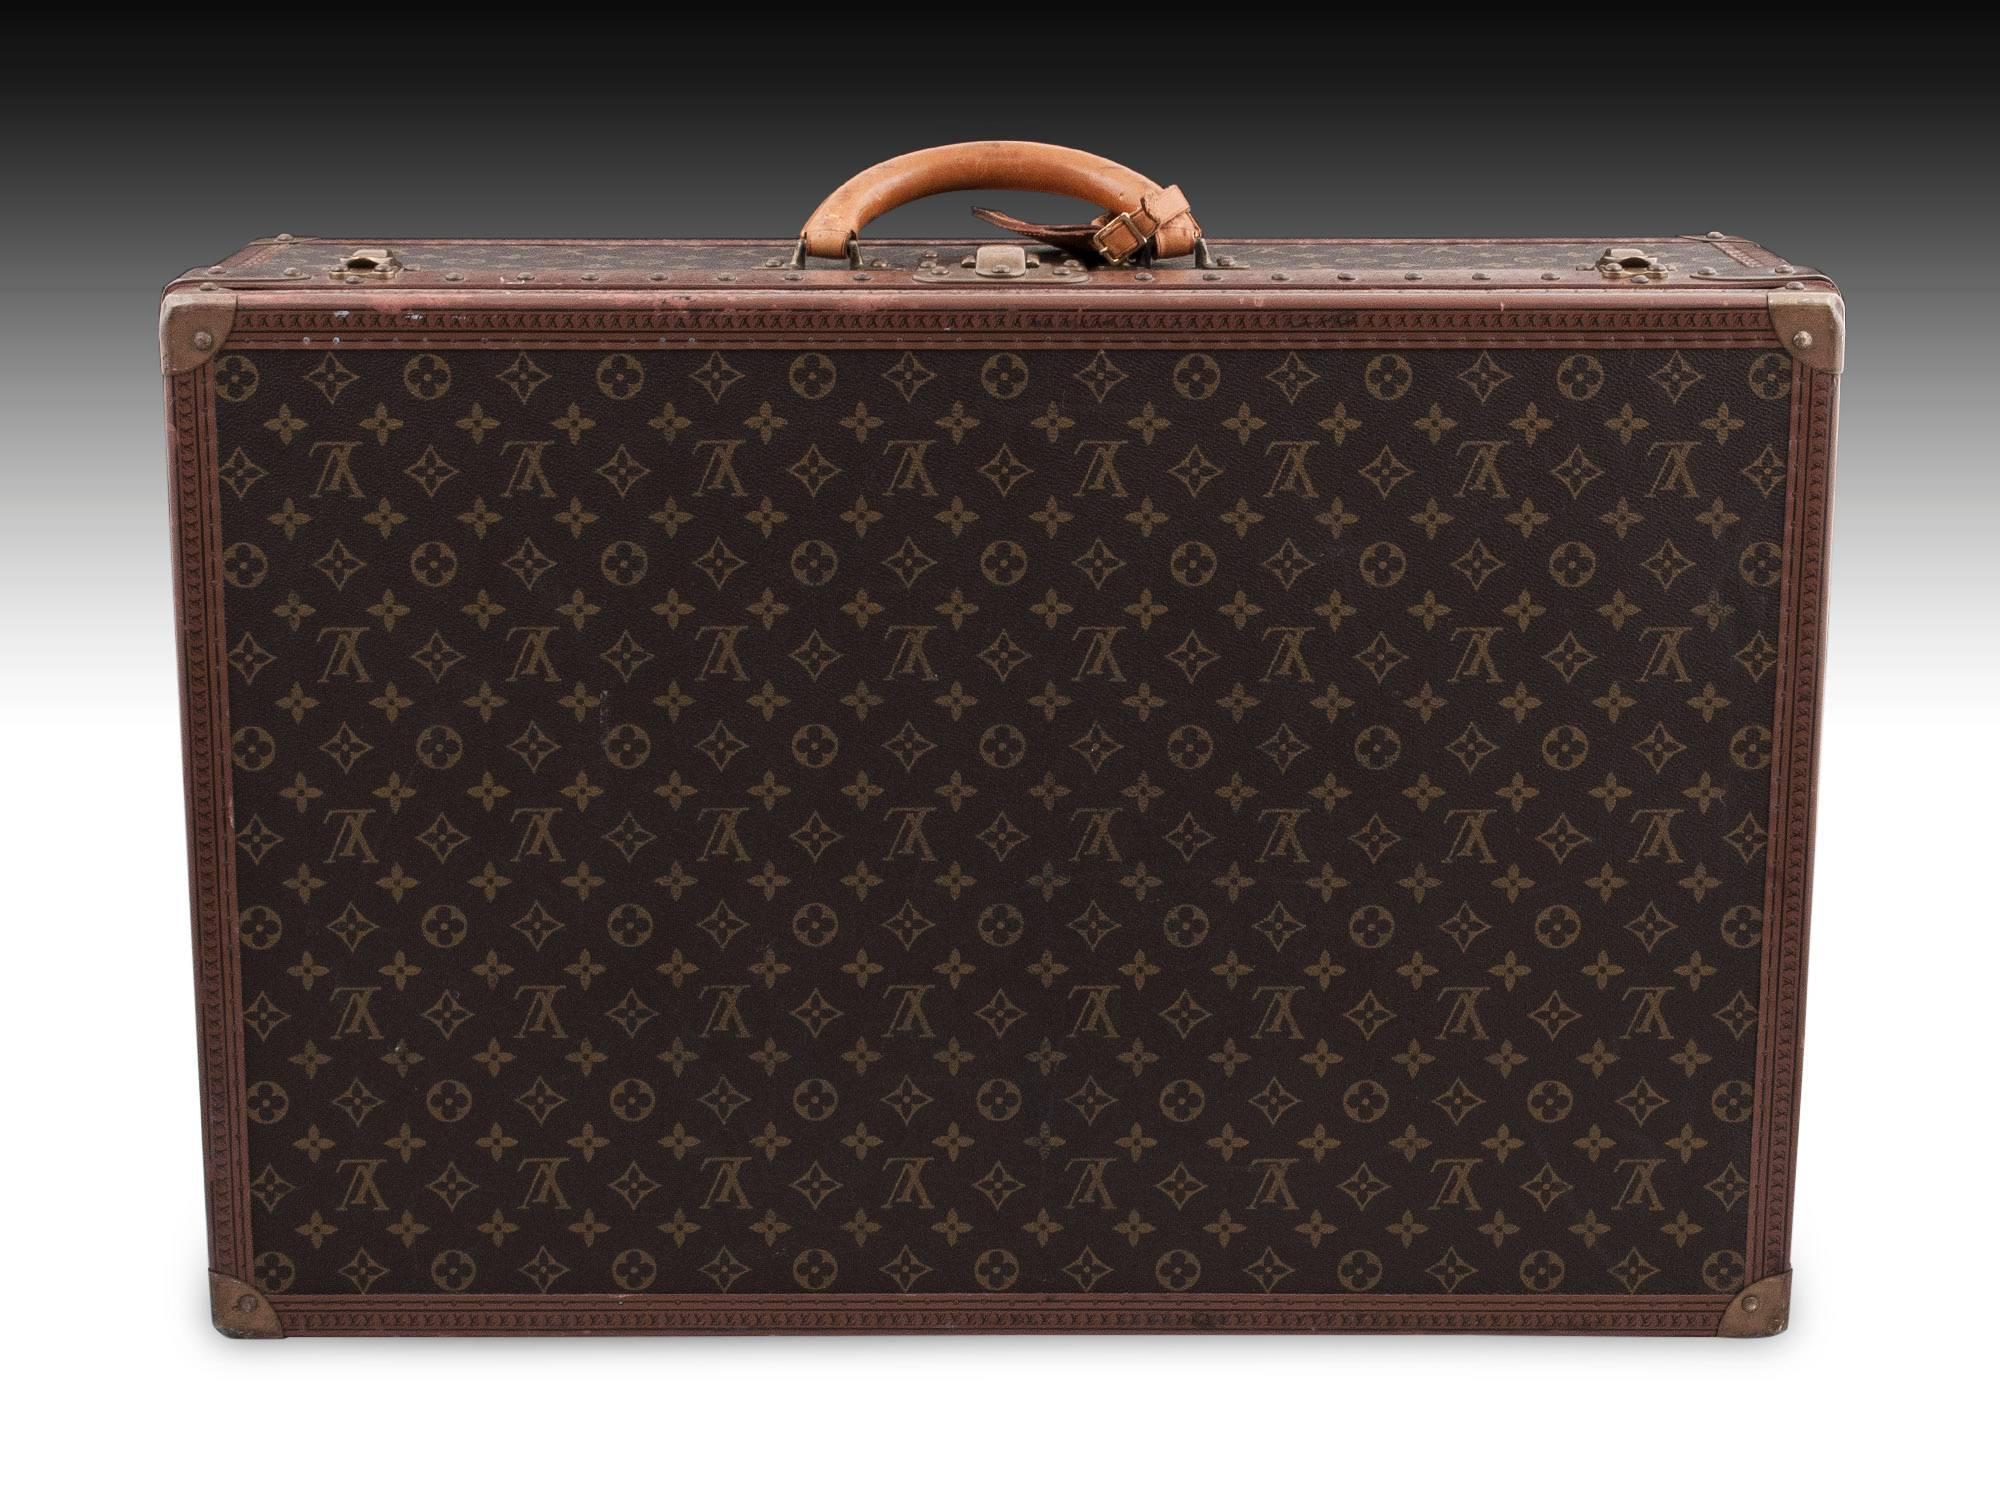 Louis Vuitton luxury hard-sided vintage suitcase with monogram canvas, riveted edging, brass corner brackets lock and latches. With a rounded leather handle with original Louis Vuitton leather tag. 

The interior features two straps with Louis